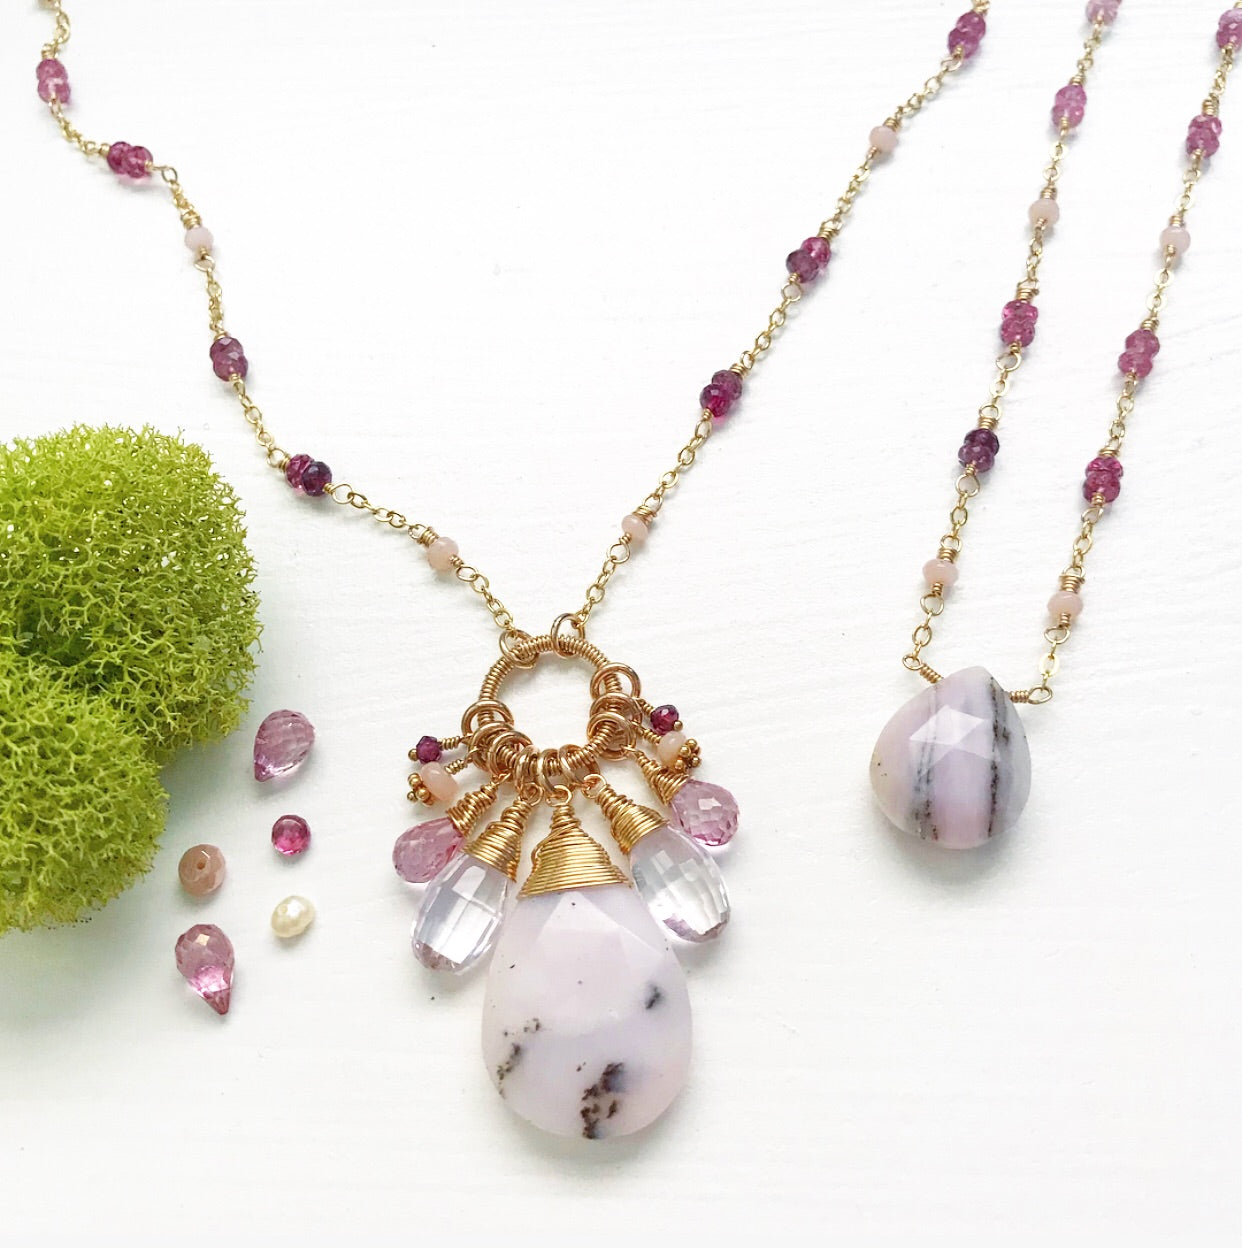 620-One of a Kind Gemstone Drop Necklace